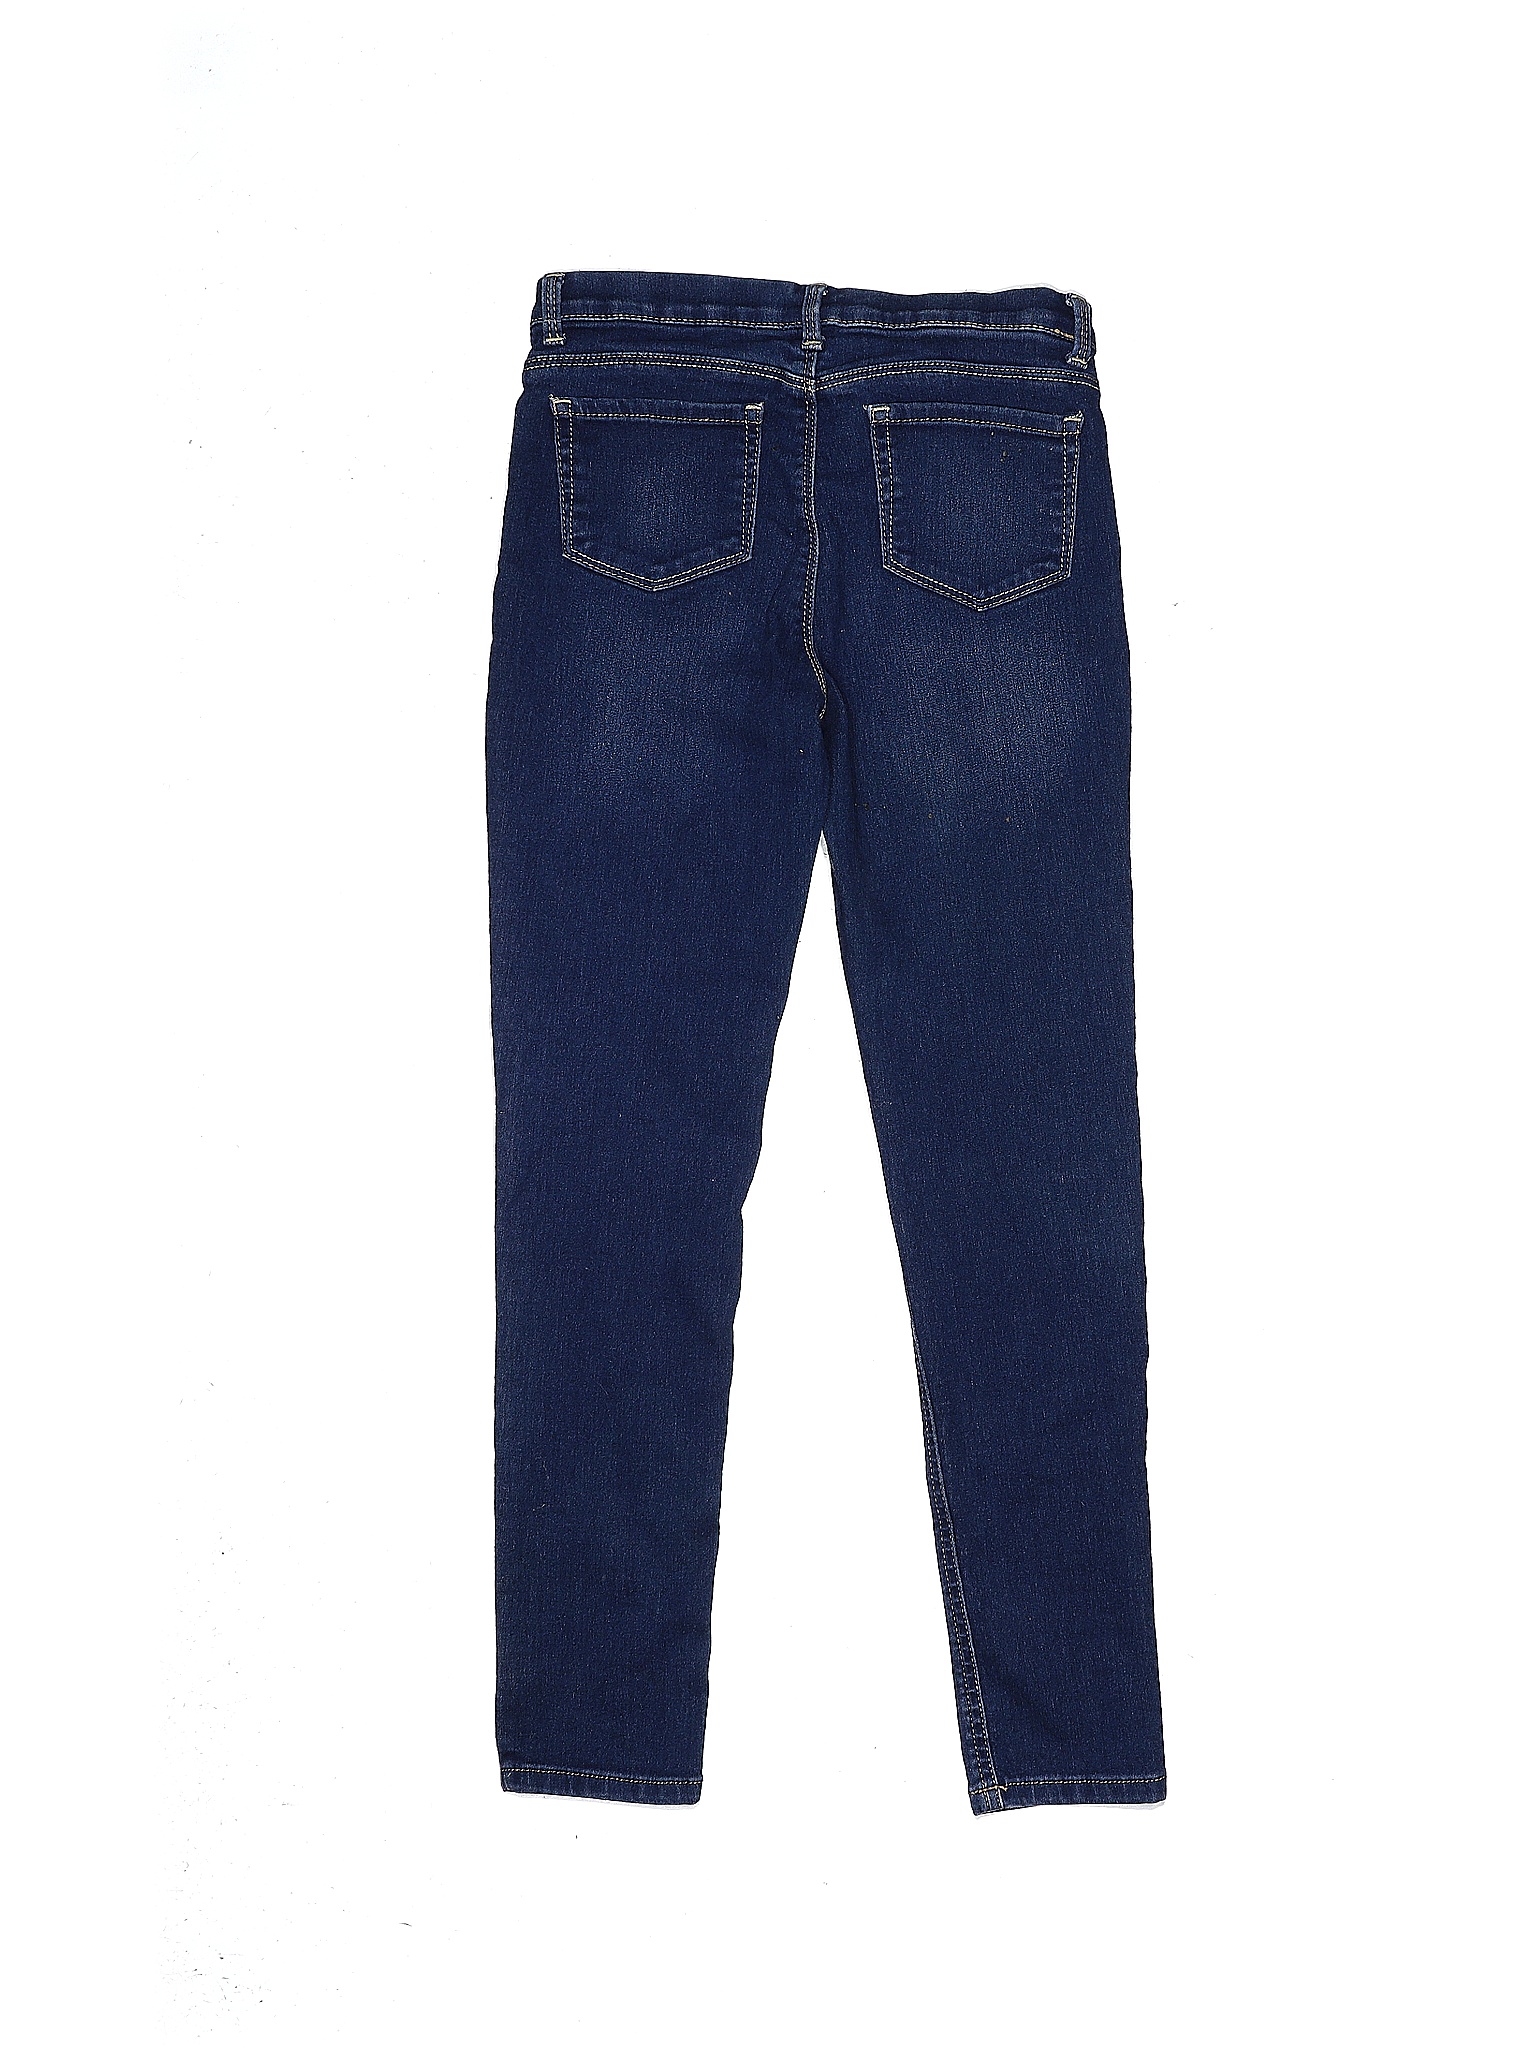 Girls Cotton Skinny Jeans Denim Ex Chainstore Ages 3 years Until 16 years 